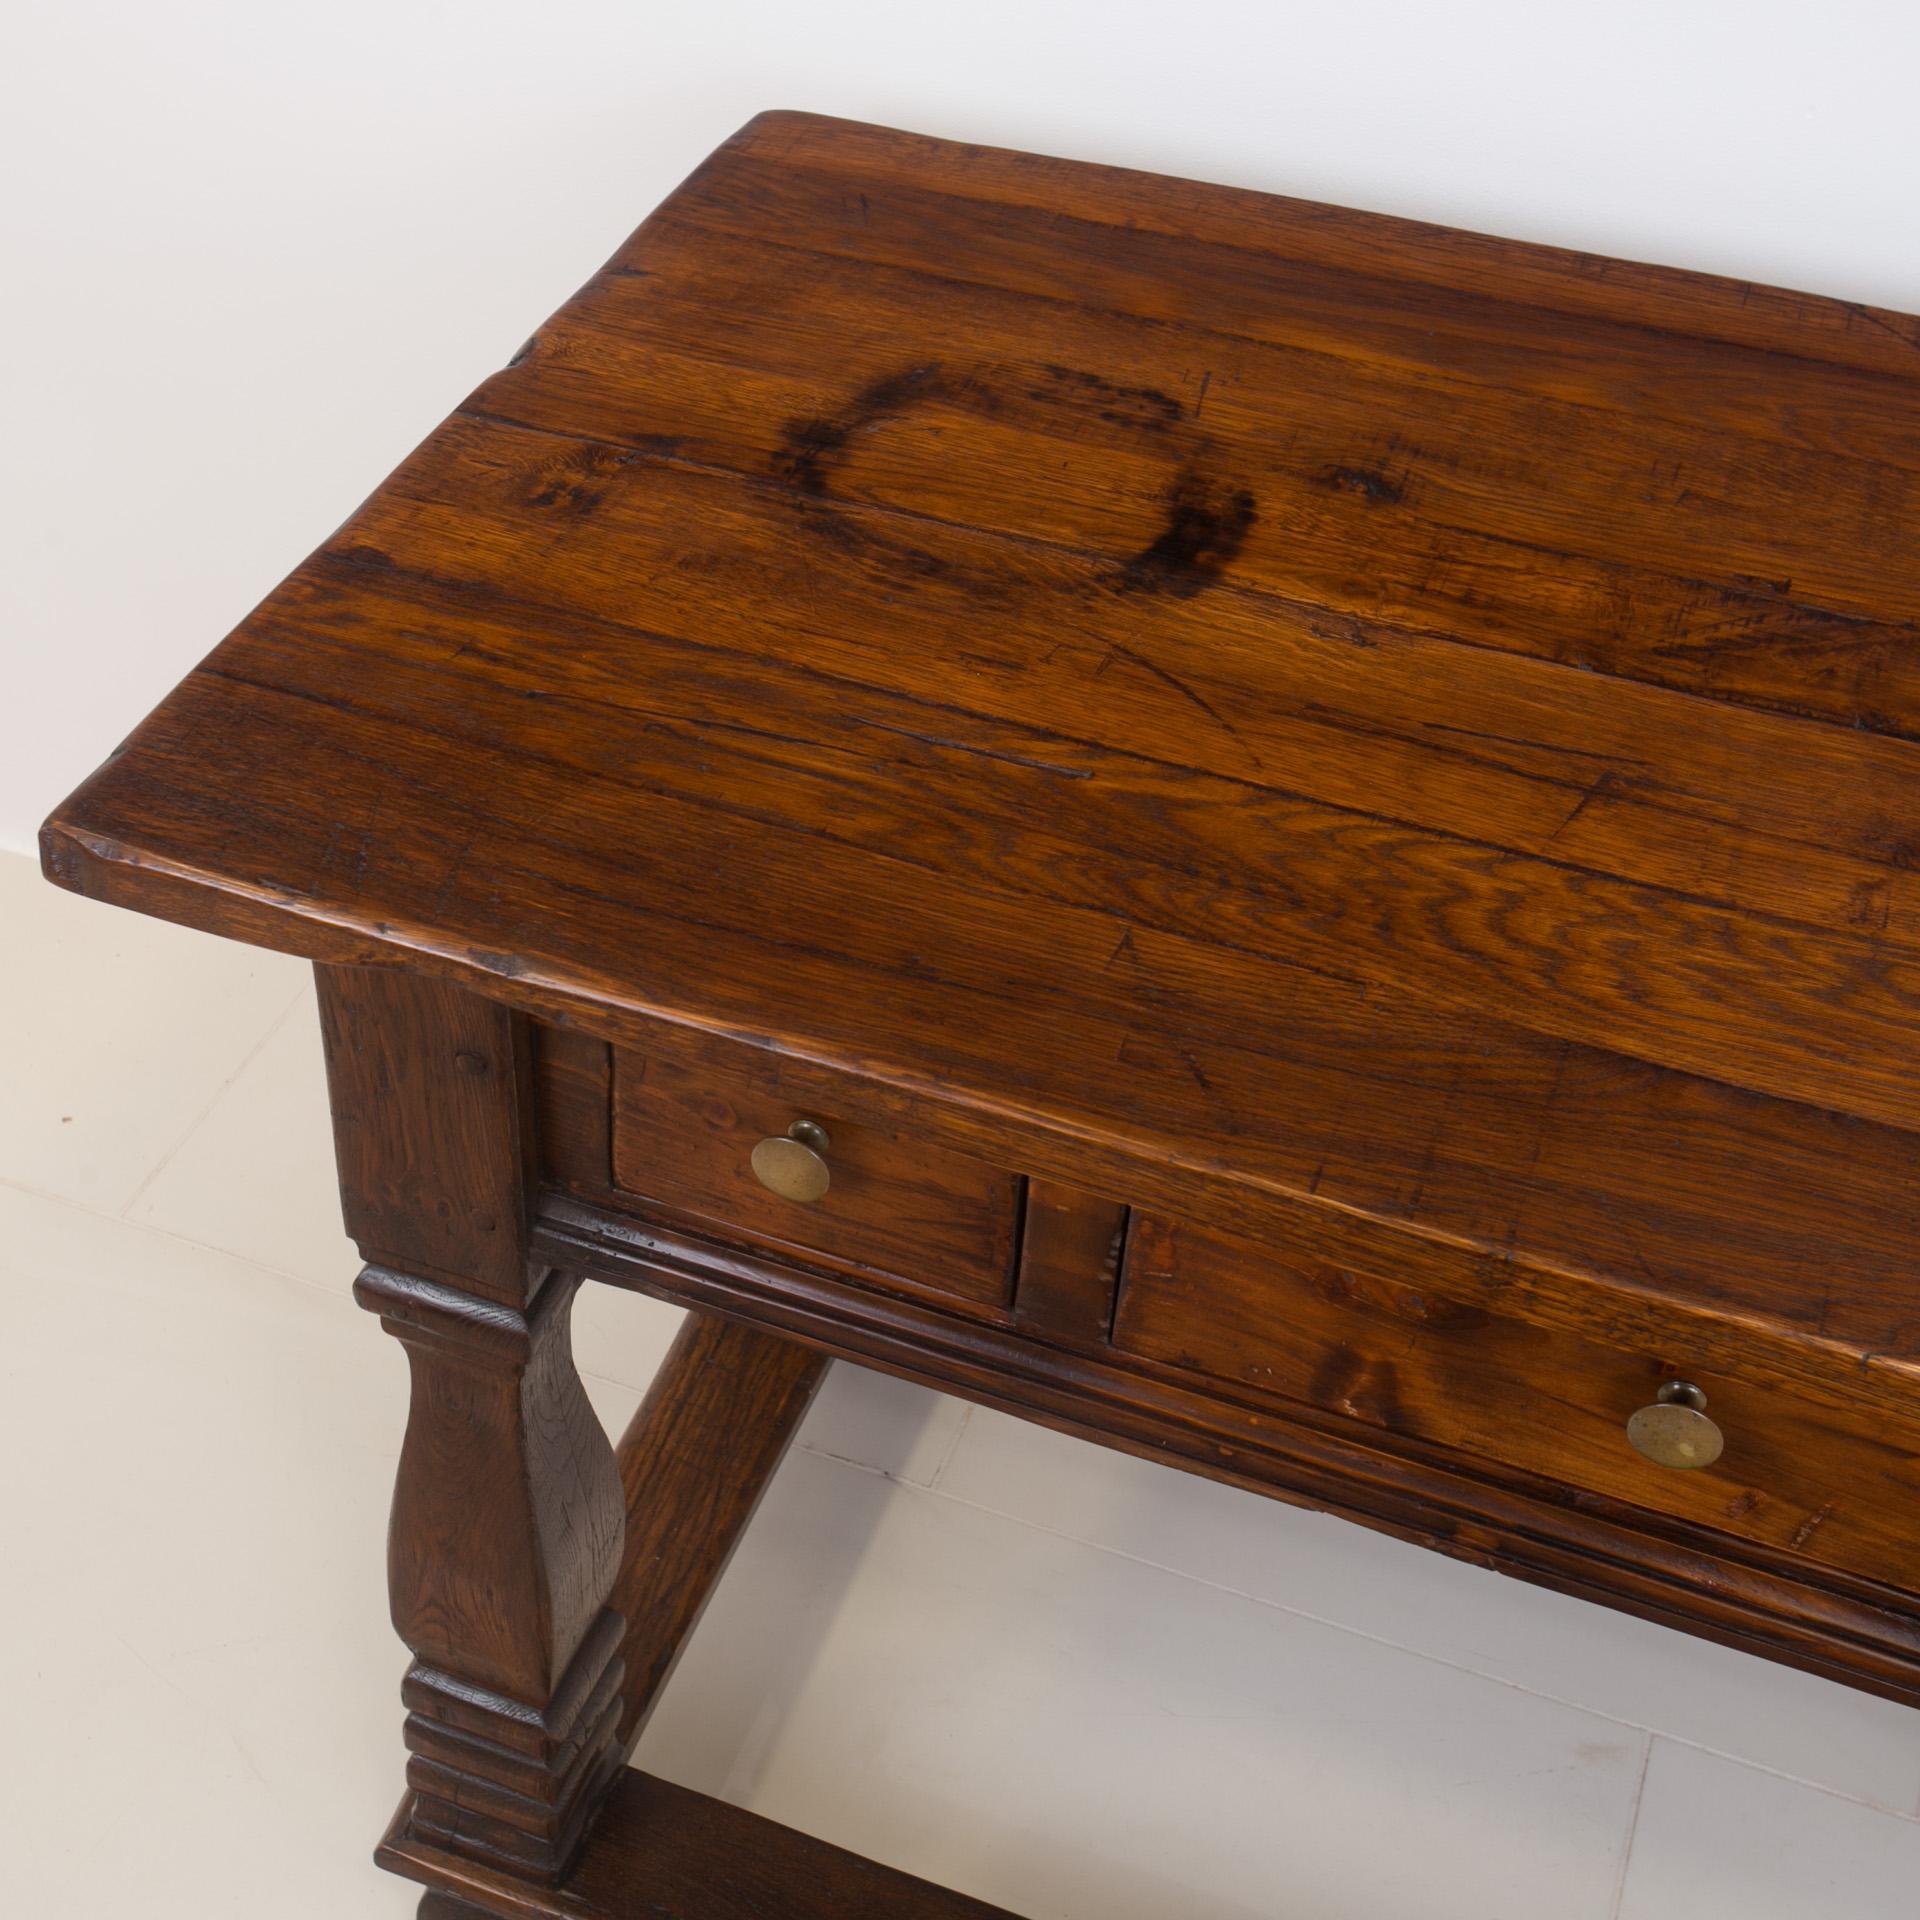 Solid Oak Table, 18th / 19th Century, Rustic Style, Prep or Dining Table 6